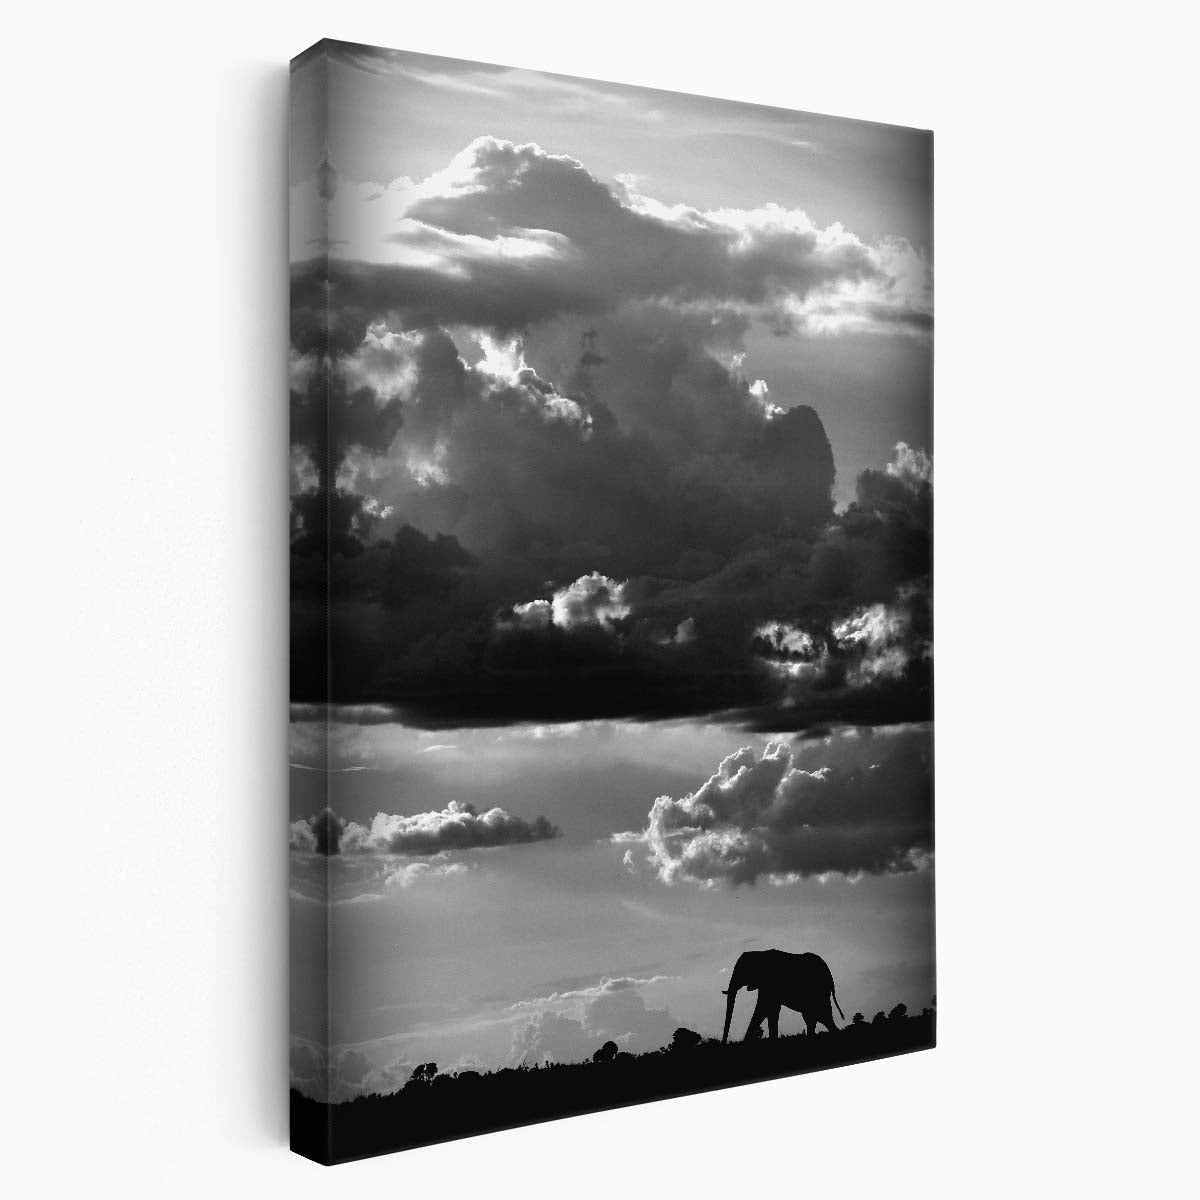 Majestic African Elephant Photography Artwork in Monochrome, Safari Wildlife Scene by Luxuriance Designs, made in USA